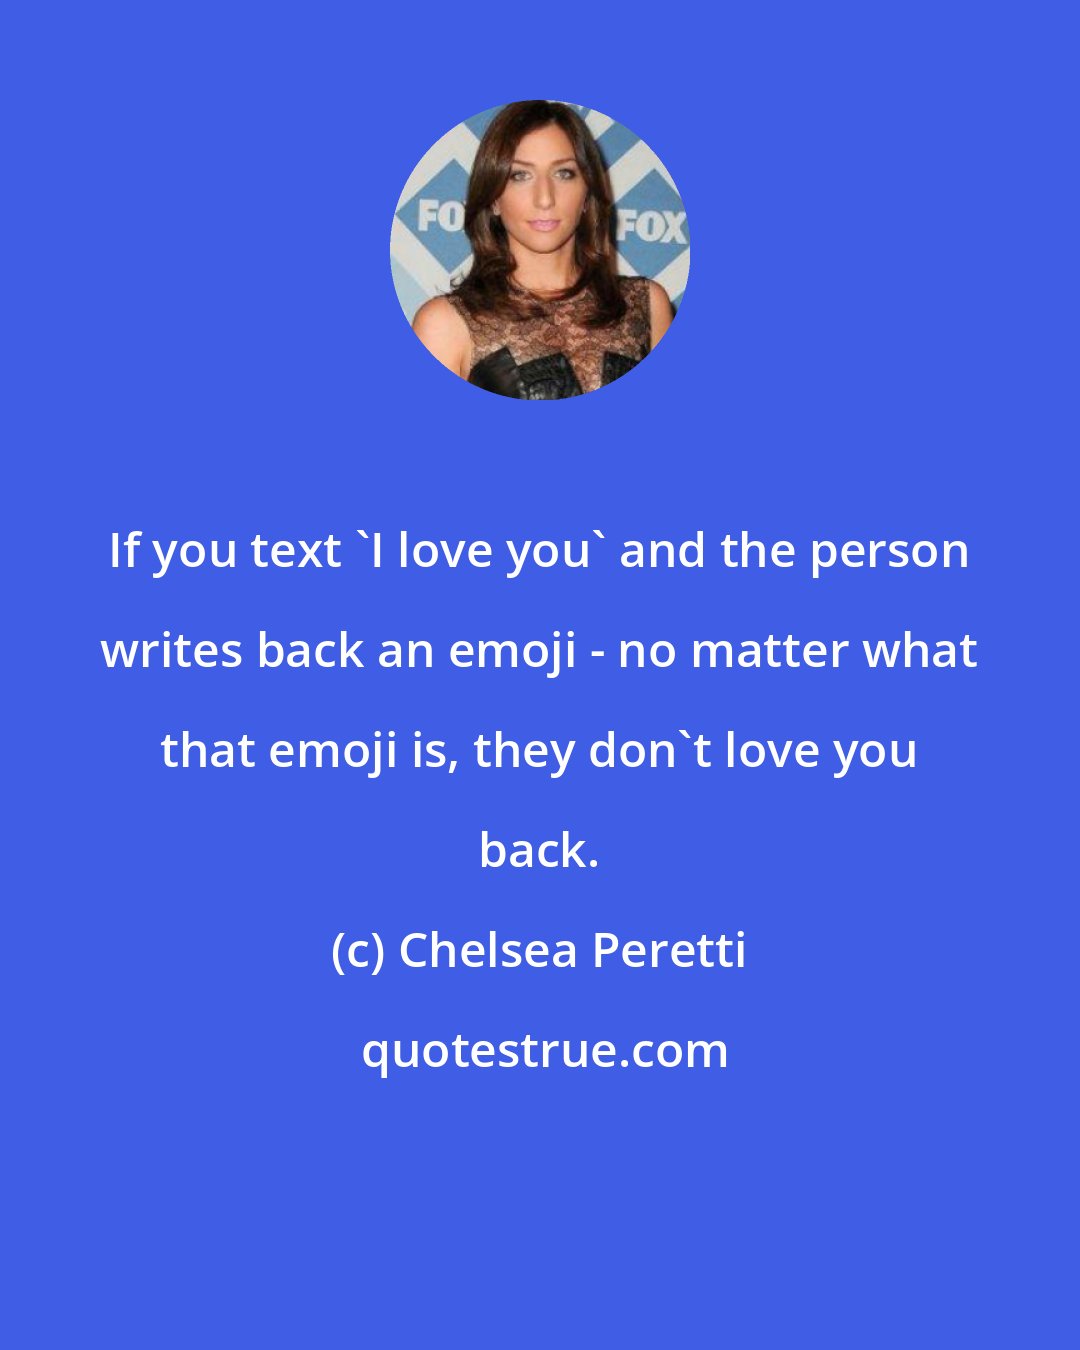 Chelsea Peretti: If you text 'I love you' and the person writes back an emoji - no matter what that emoji is, they don't love you back.